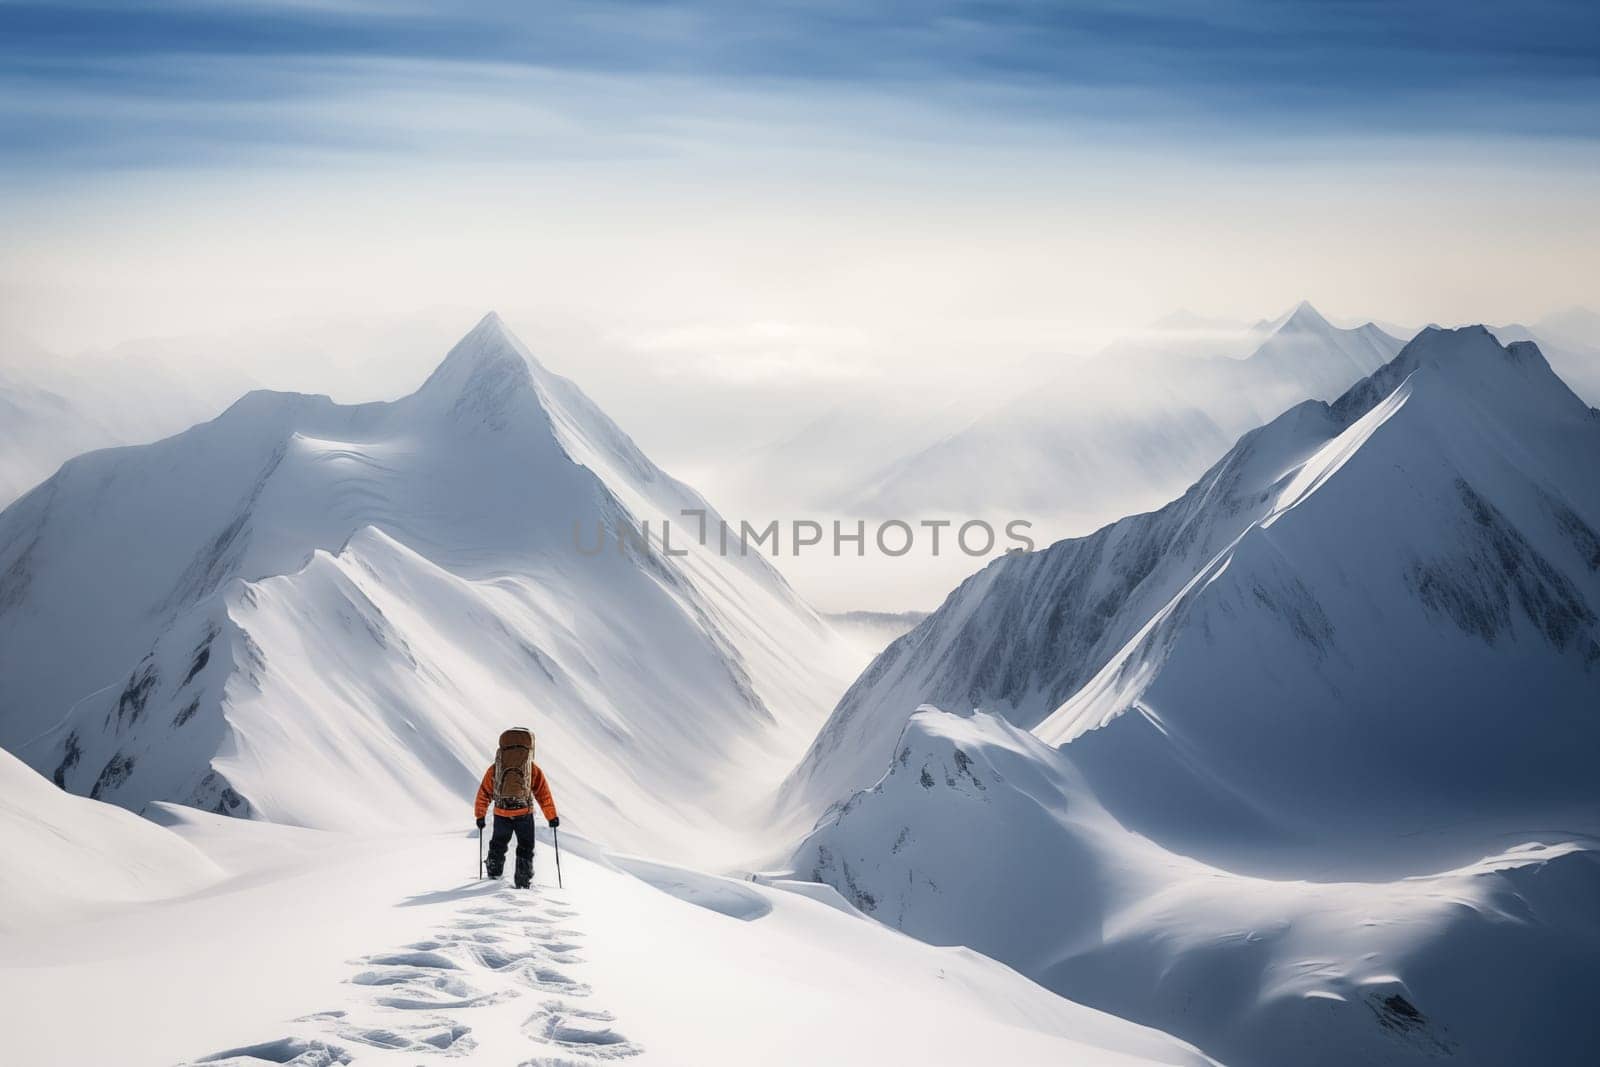 A mountaineer in mountains approaching a majestic snowy mountain peak amidst a snowfall and snow storm. Solitude and determination, adventure and challenge of climbing in extreme conditions